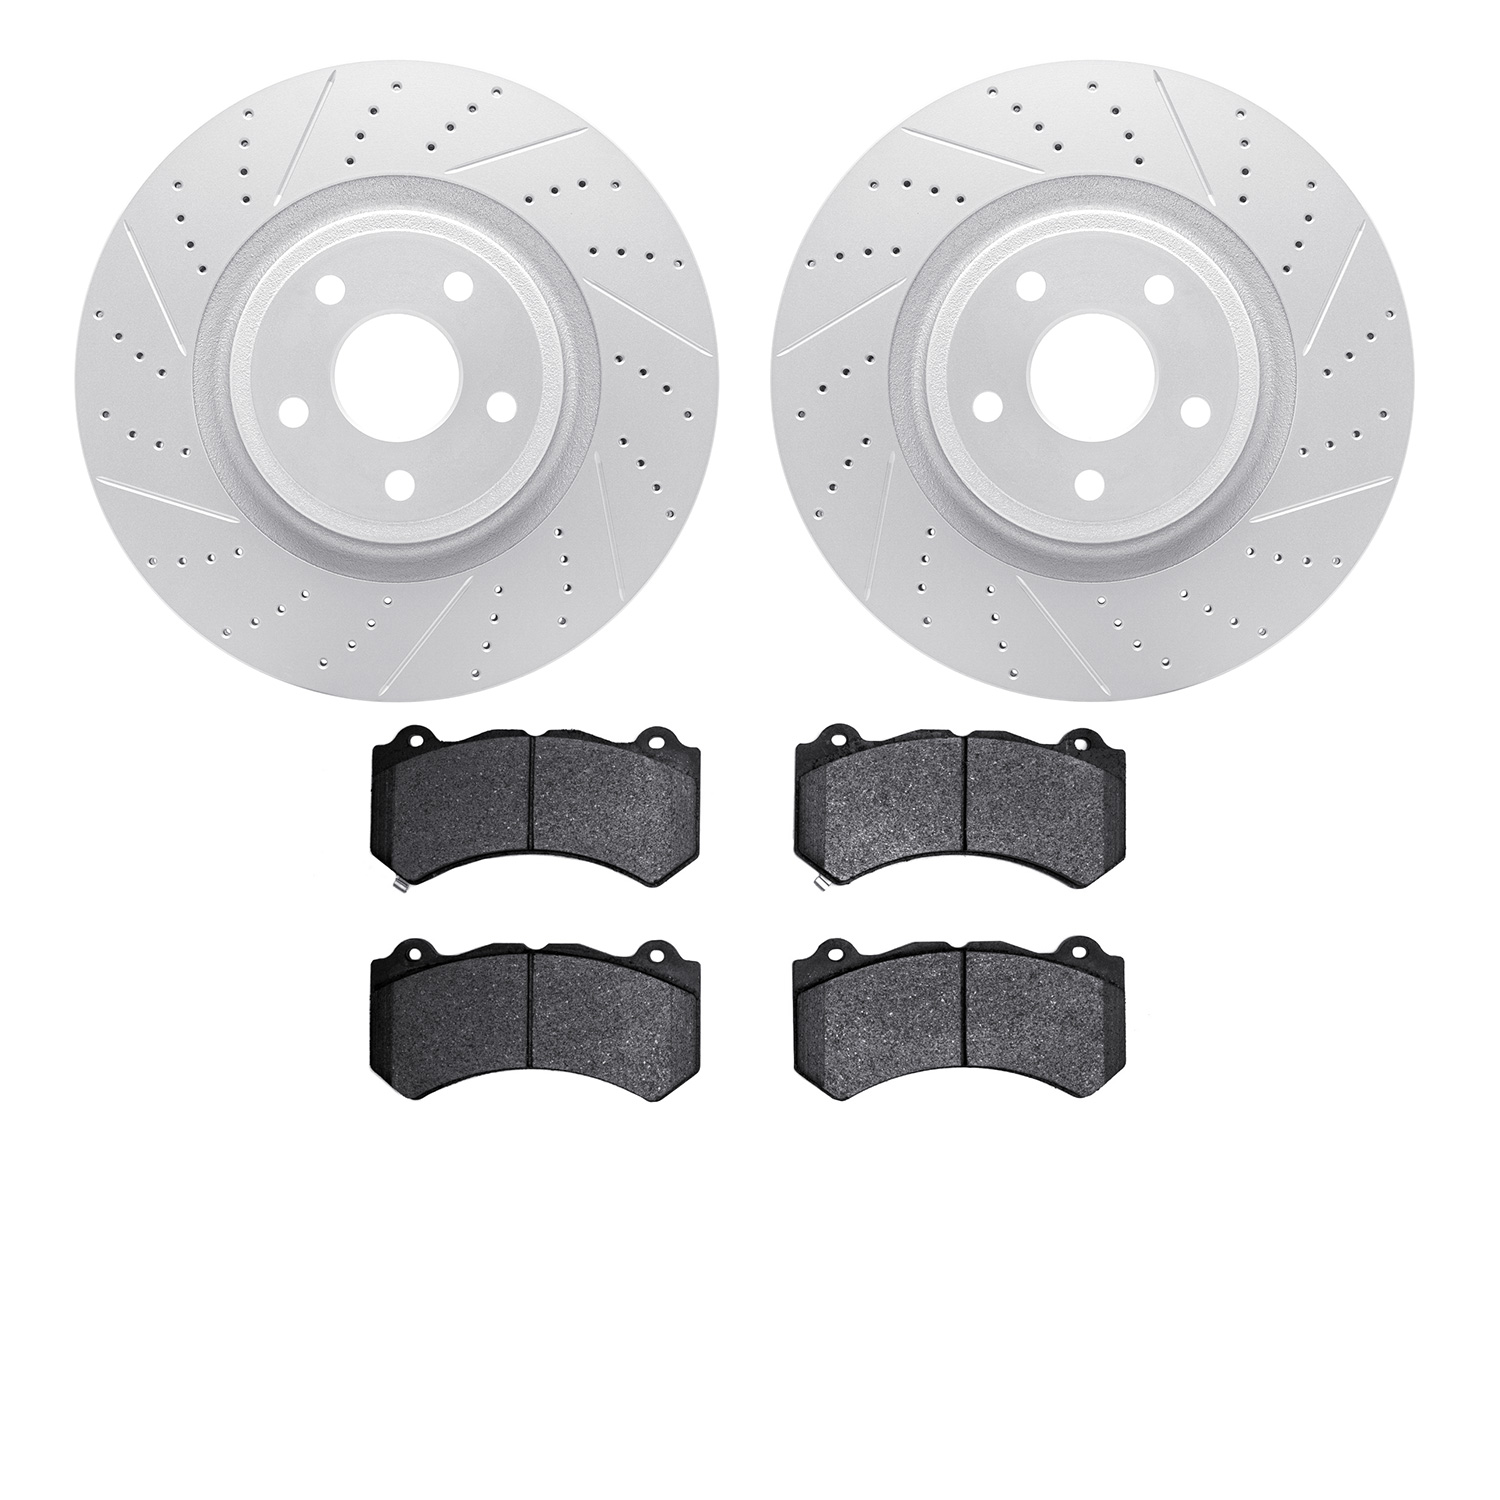 2502-42009 Geoperformance Drilled/Slotted Rotors w/5000 Advanced Brake Pads Kit, Fits Select Mopar, Position: Front